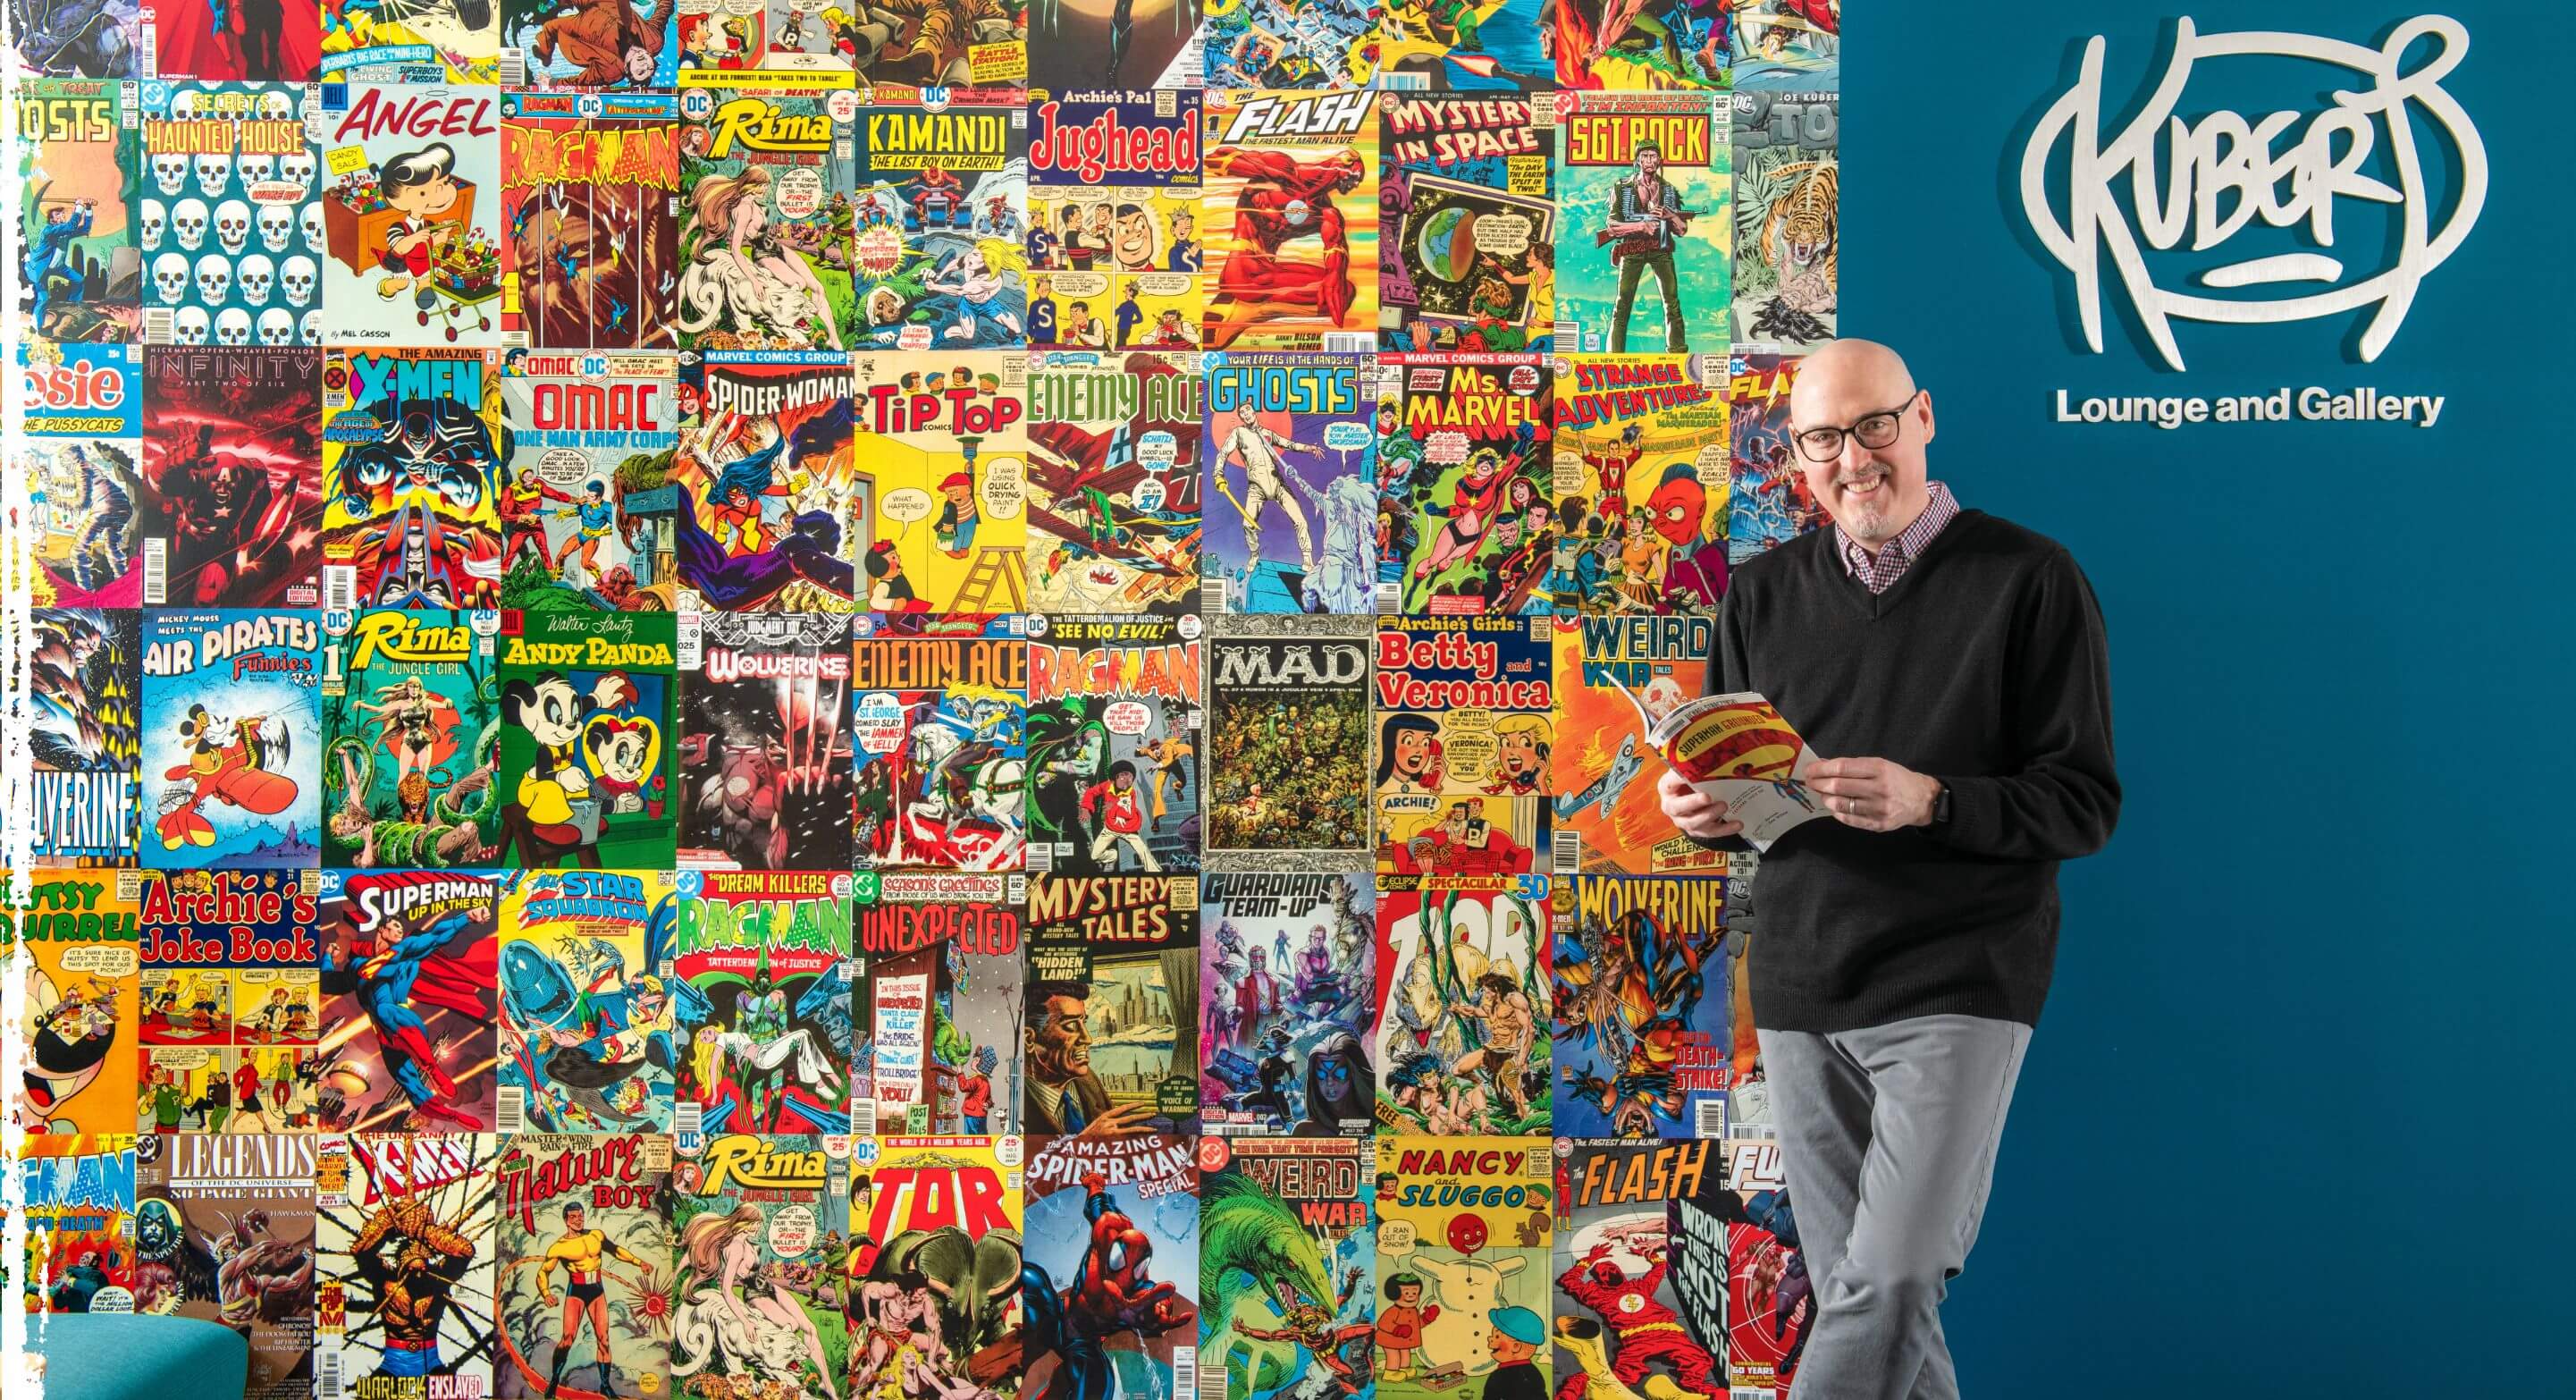 Man holding a comic book leaning against a wall with a collage of varying comic book covers and a sign that reads, Kubert Lounge and Gallery.